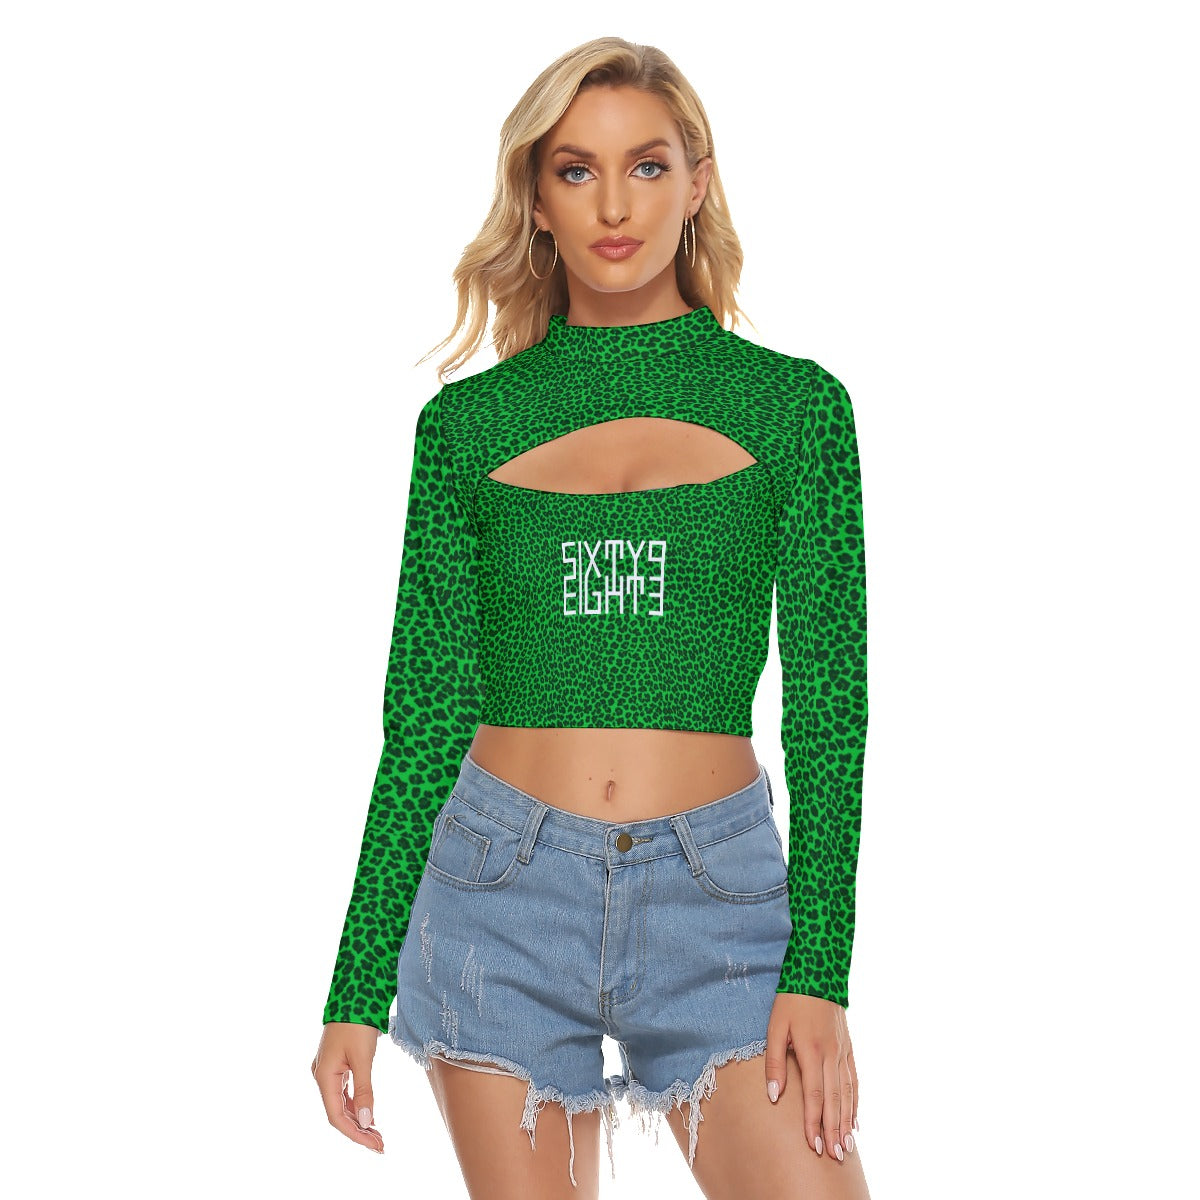 Sixty Eight 93 Logo White Cheetah Lime Green Women's Hollow Chest Keyhole Tight Crop Top